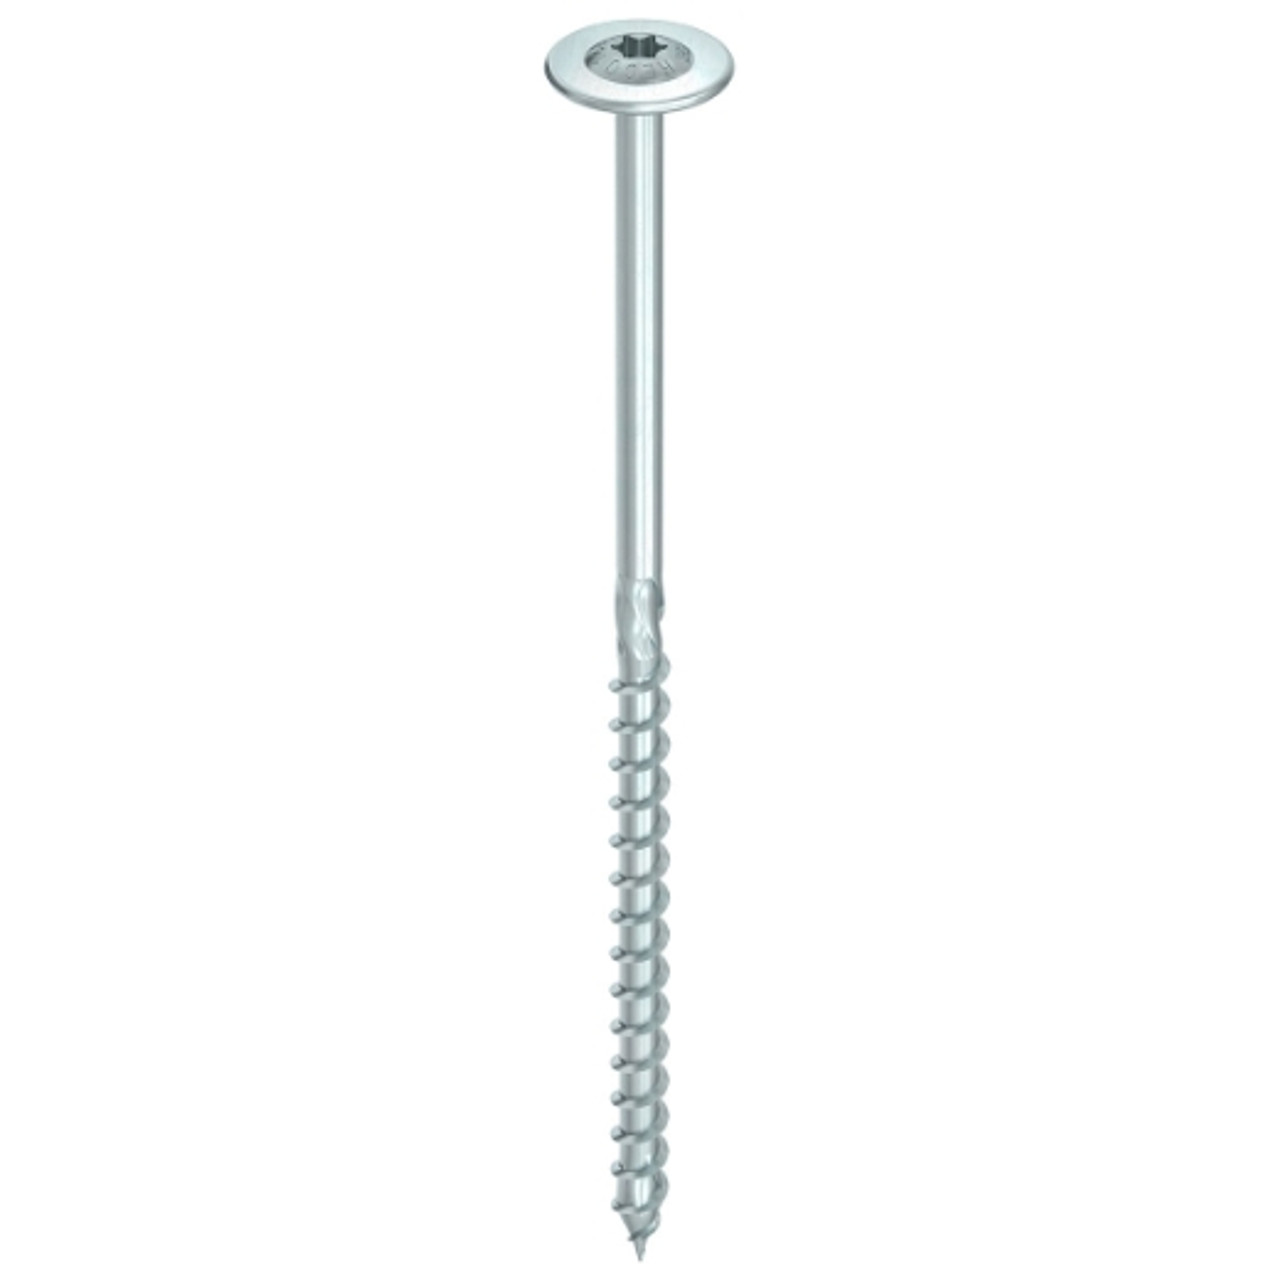 XL Washer Head Screws | Find a range of XL Washer Head Screws for Post Screws and our range from other brands such as Simpson Strong Tie in our online store